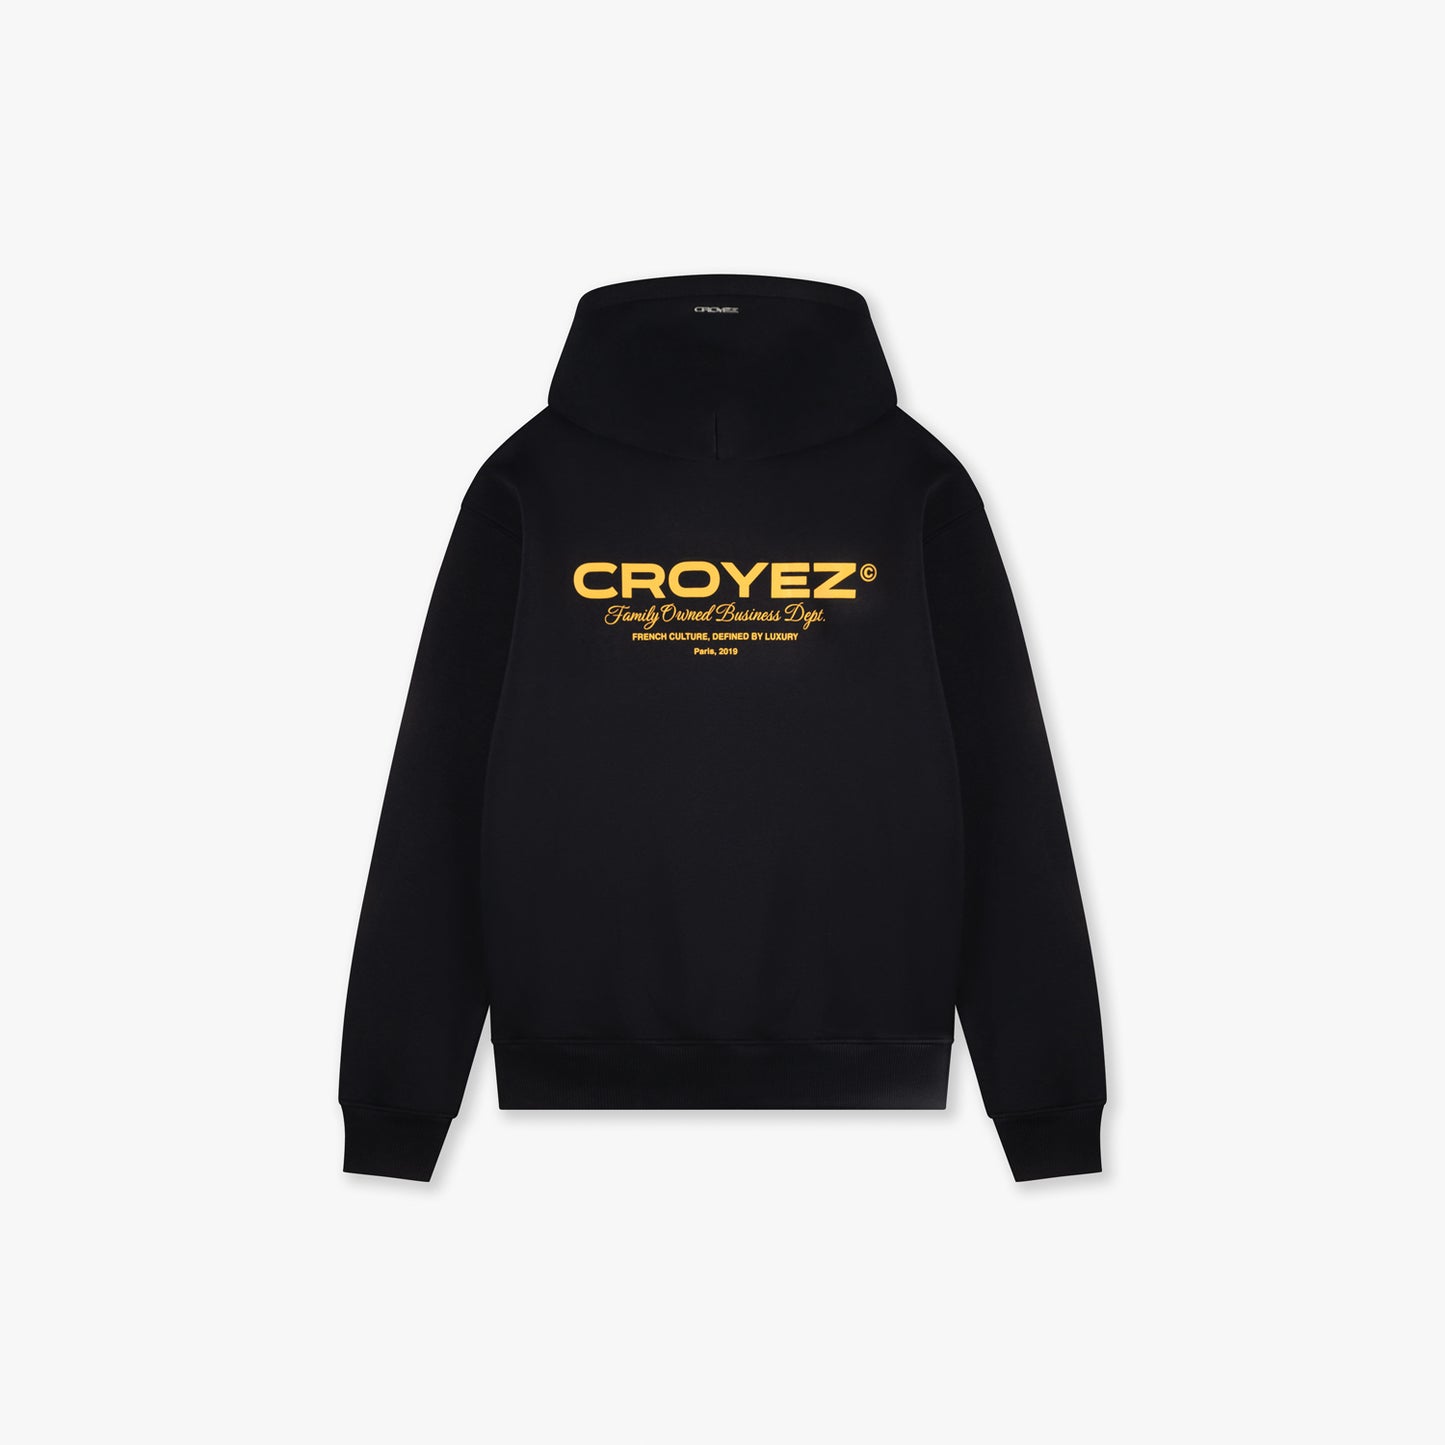 CROYEZ FAMILY OWNED BUSINESS HOODIE - BLACK/YELLOW